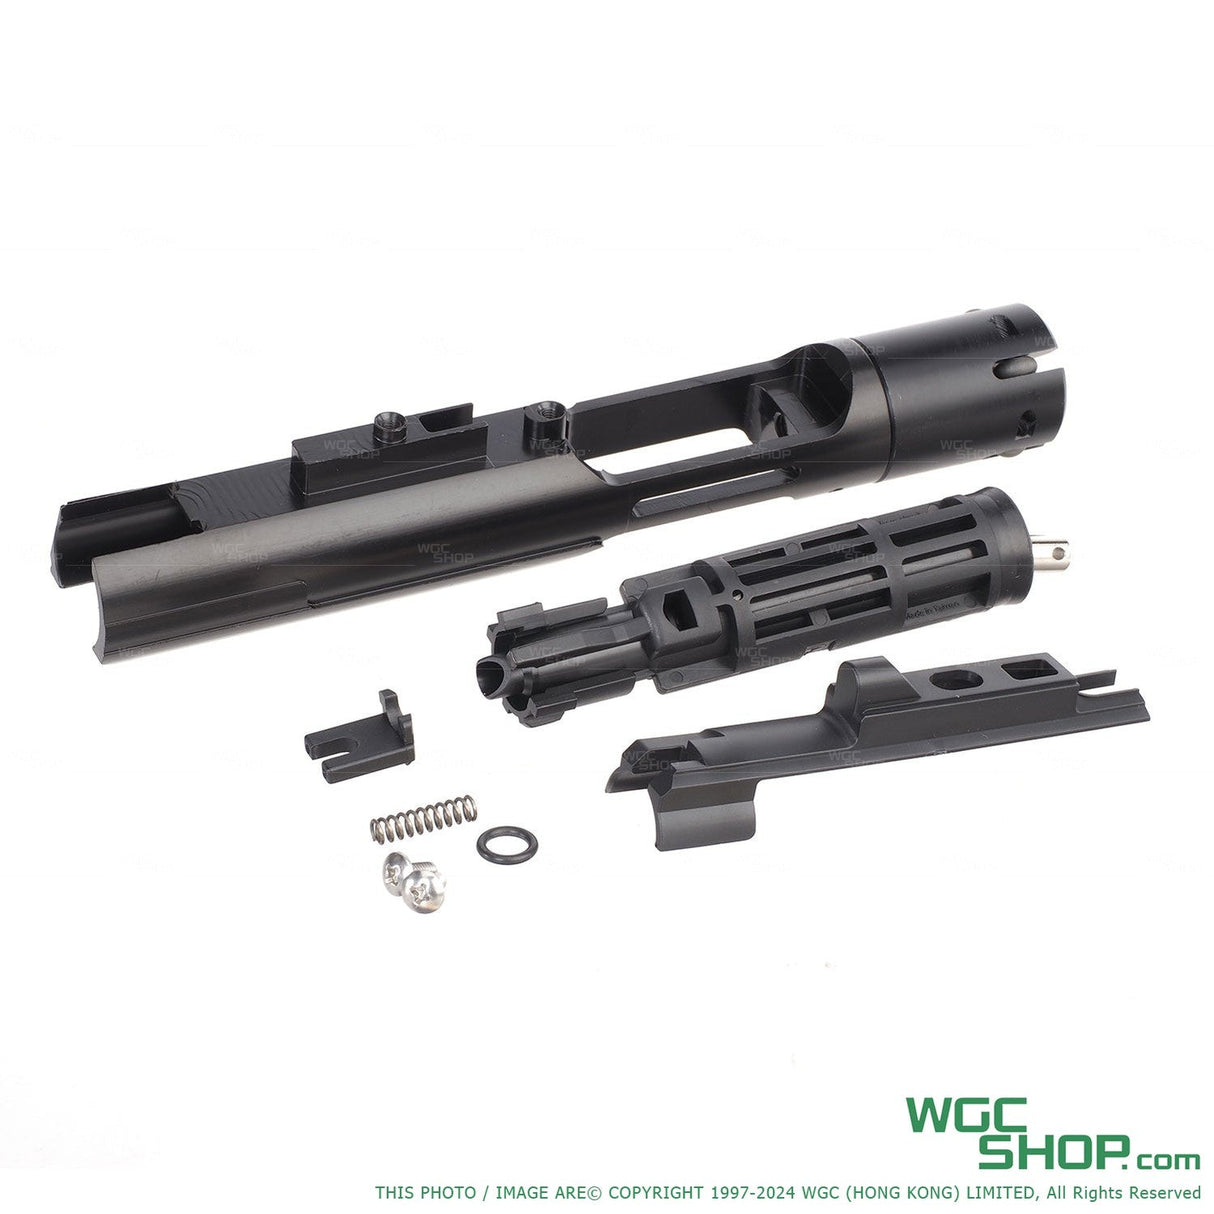 GUNDAY R Style Lightweight Steel Bolt Carrier for Marui MWS + Unicorn Nozzle Set